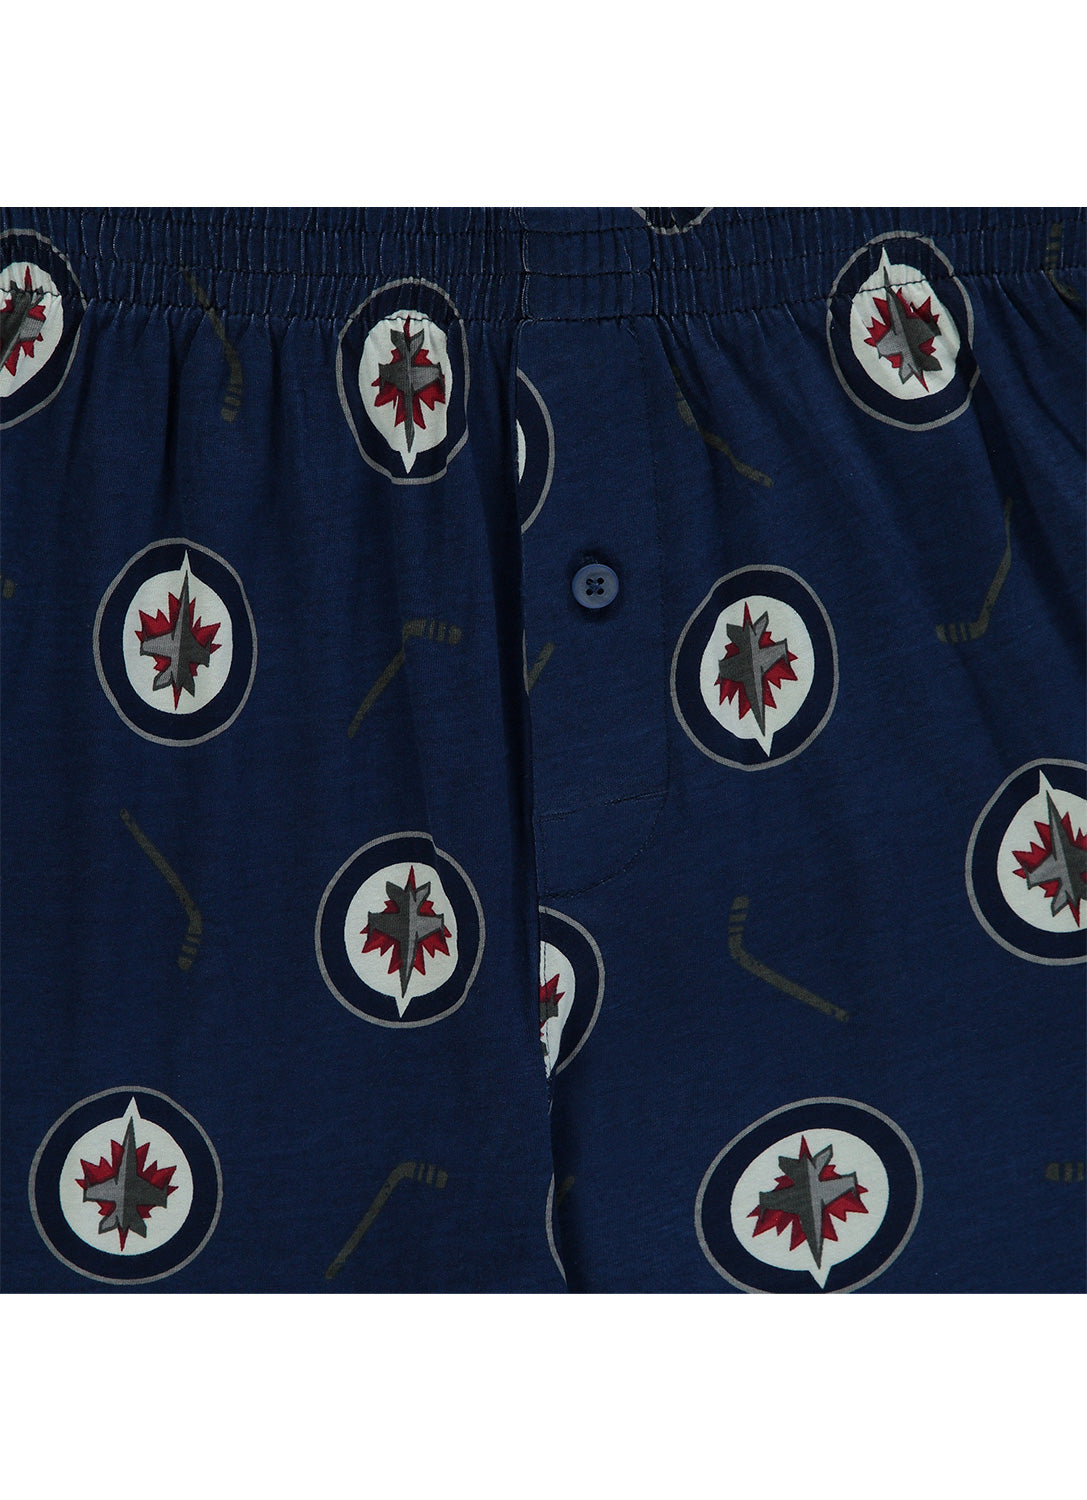 Detail of mens boxers with Winnipeg Jets print (navy)